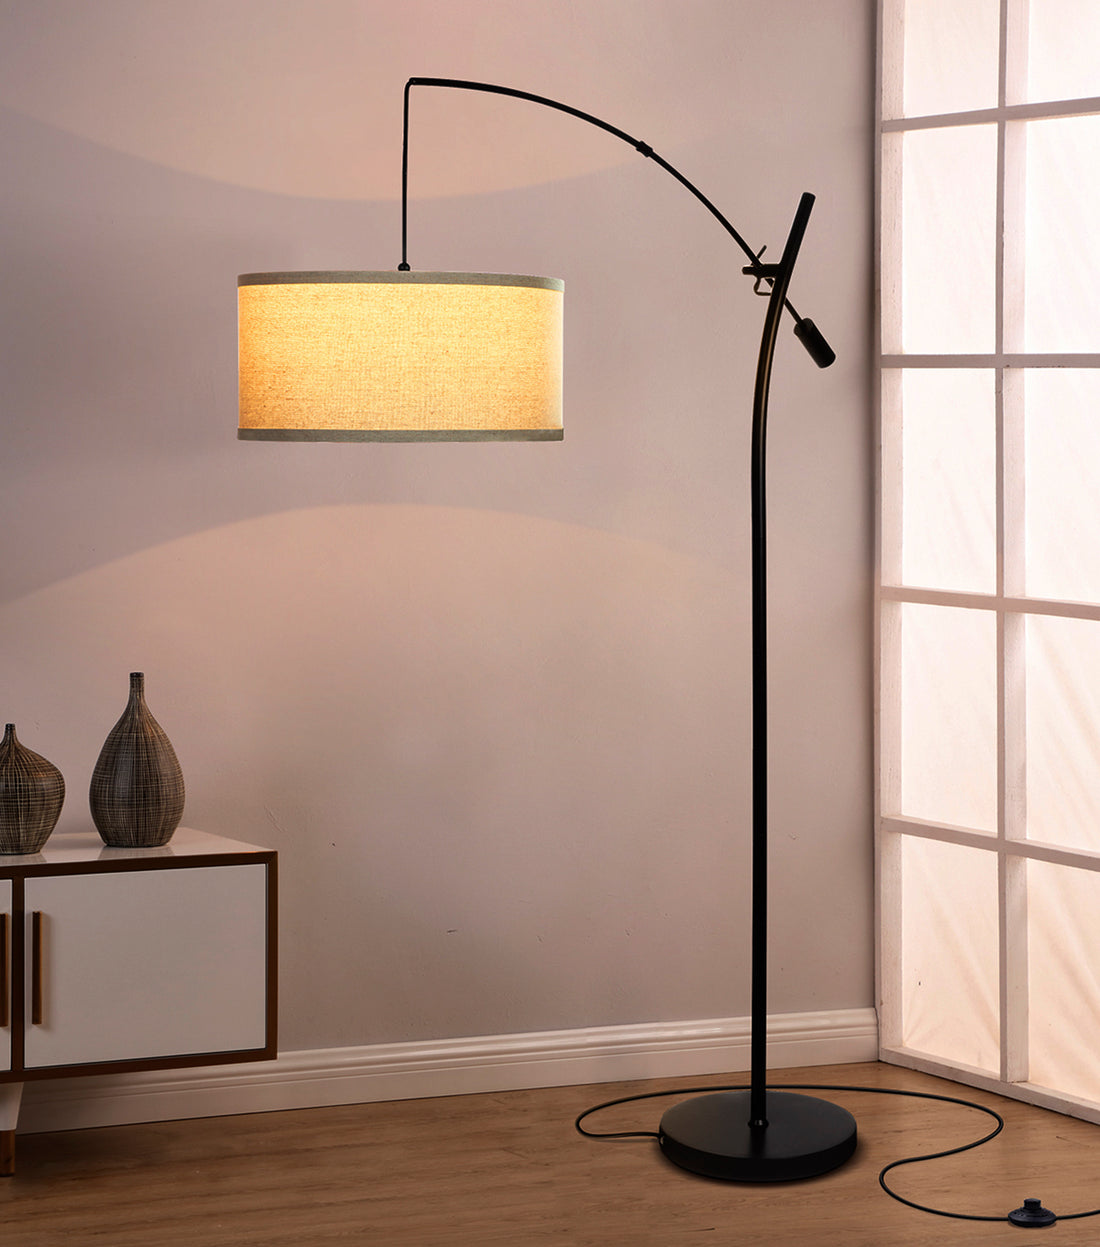 Brightech Grayson - Modern Arc Floor Lamp for Living Room - Contemporary, Tall LED Light Reaching from Behind The Couch to Hang Over It - Adjustable Arm - Industrial Style Lighting